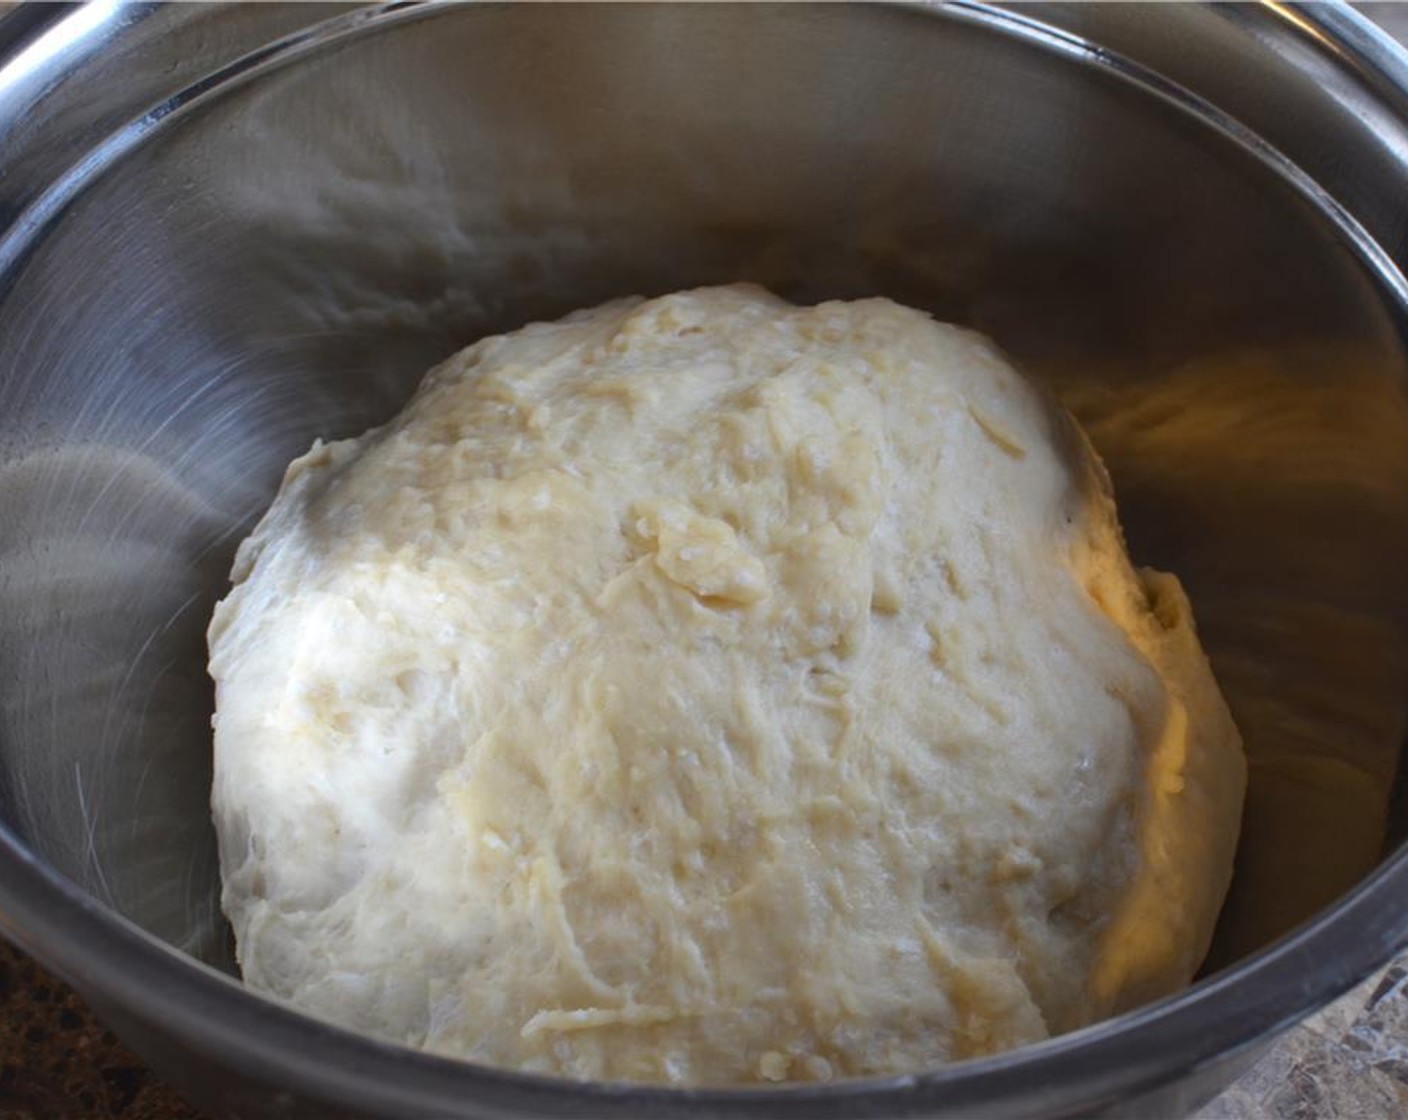 step 5 Place the dough in a well oiled bowl and turn it over to coat the dough in oil. Cover with cling film and a towel and leave the dough to rise for at 1 1/2 hours.